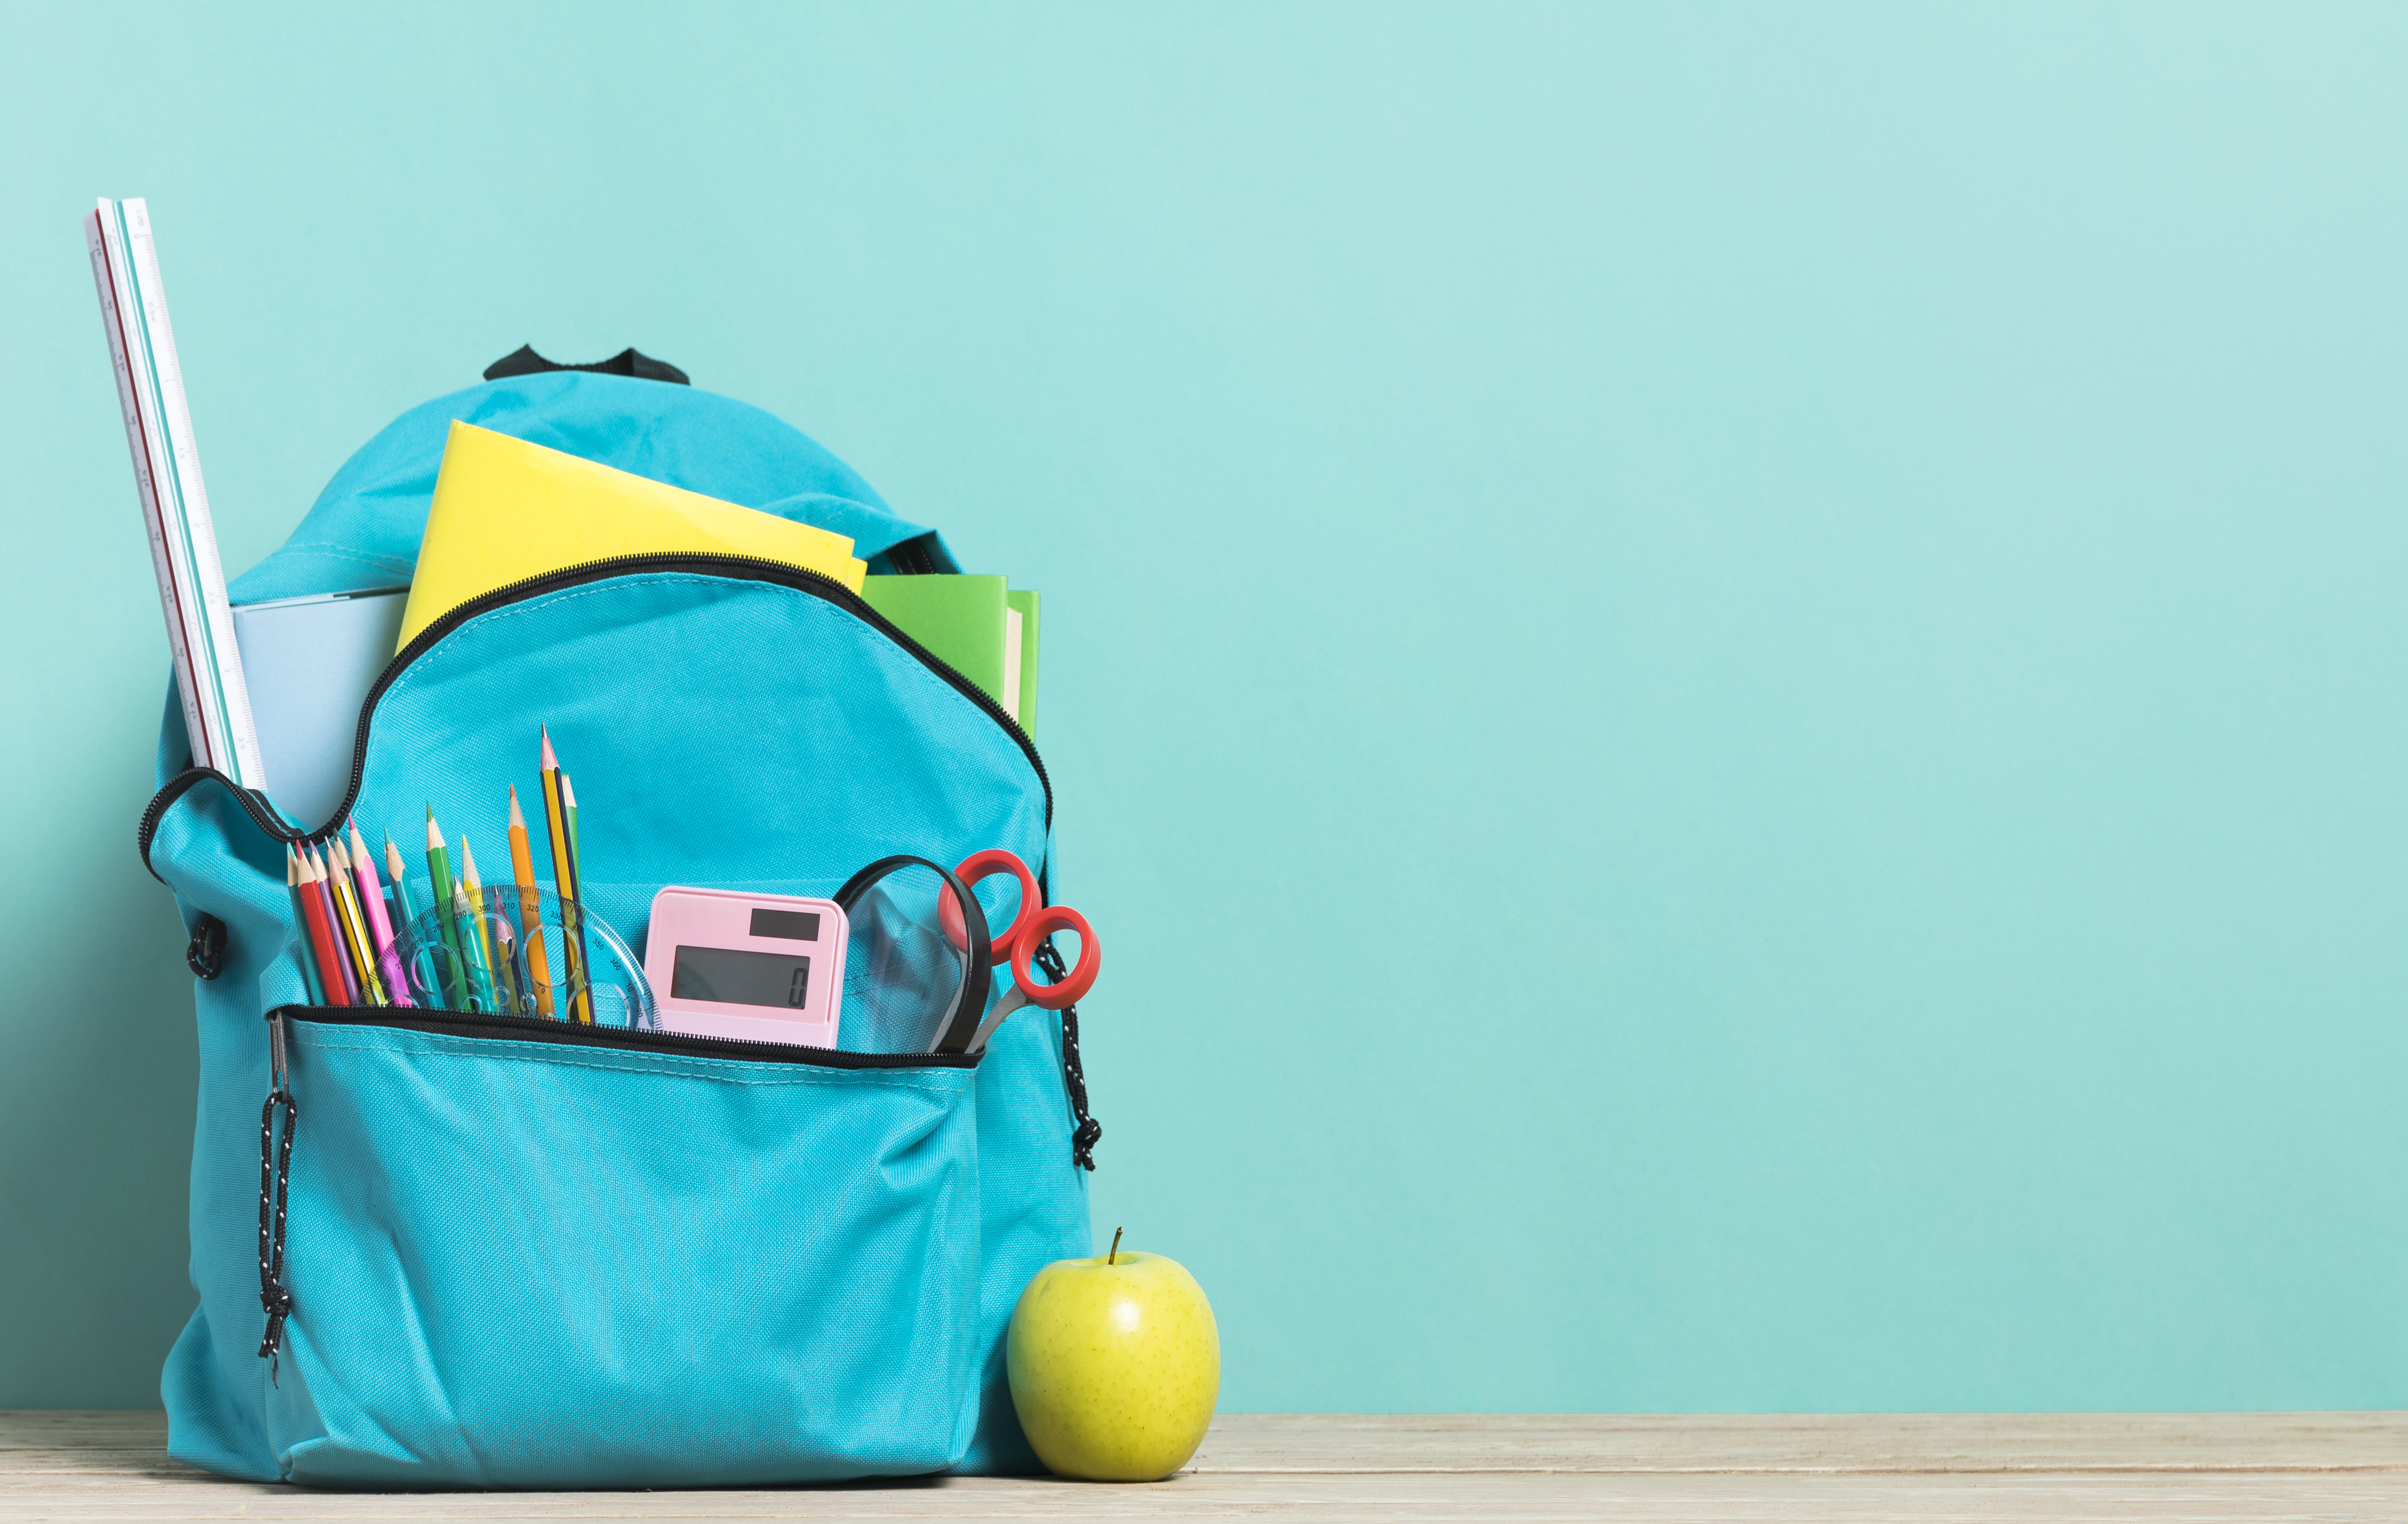 Blue backpack on a seafoam green background. Various school supplies sticking out of pockets.